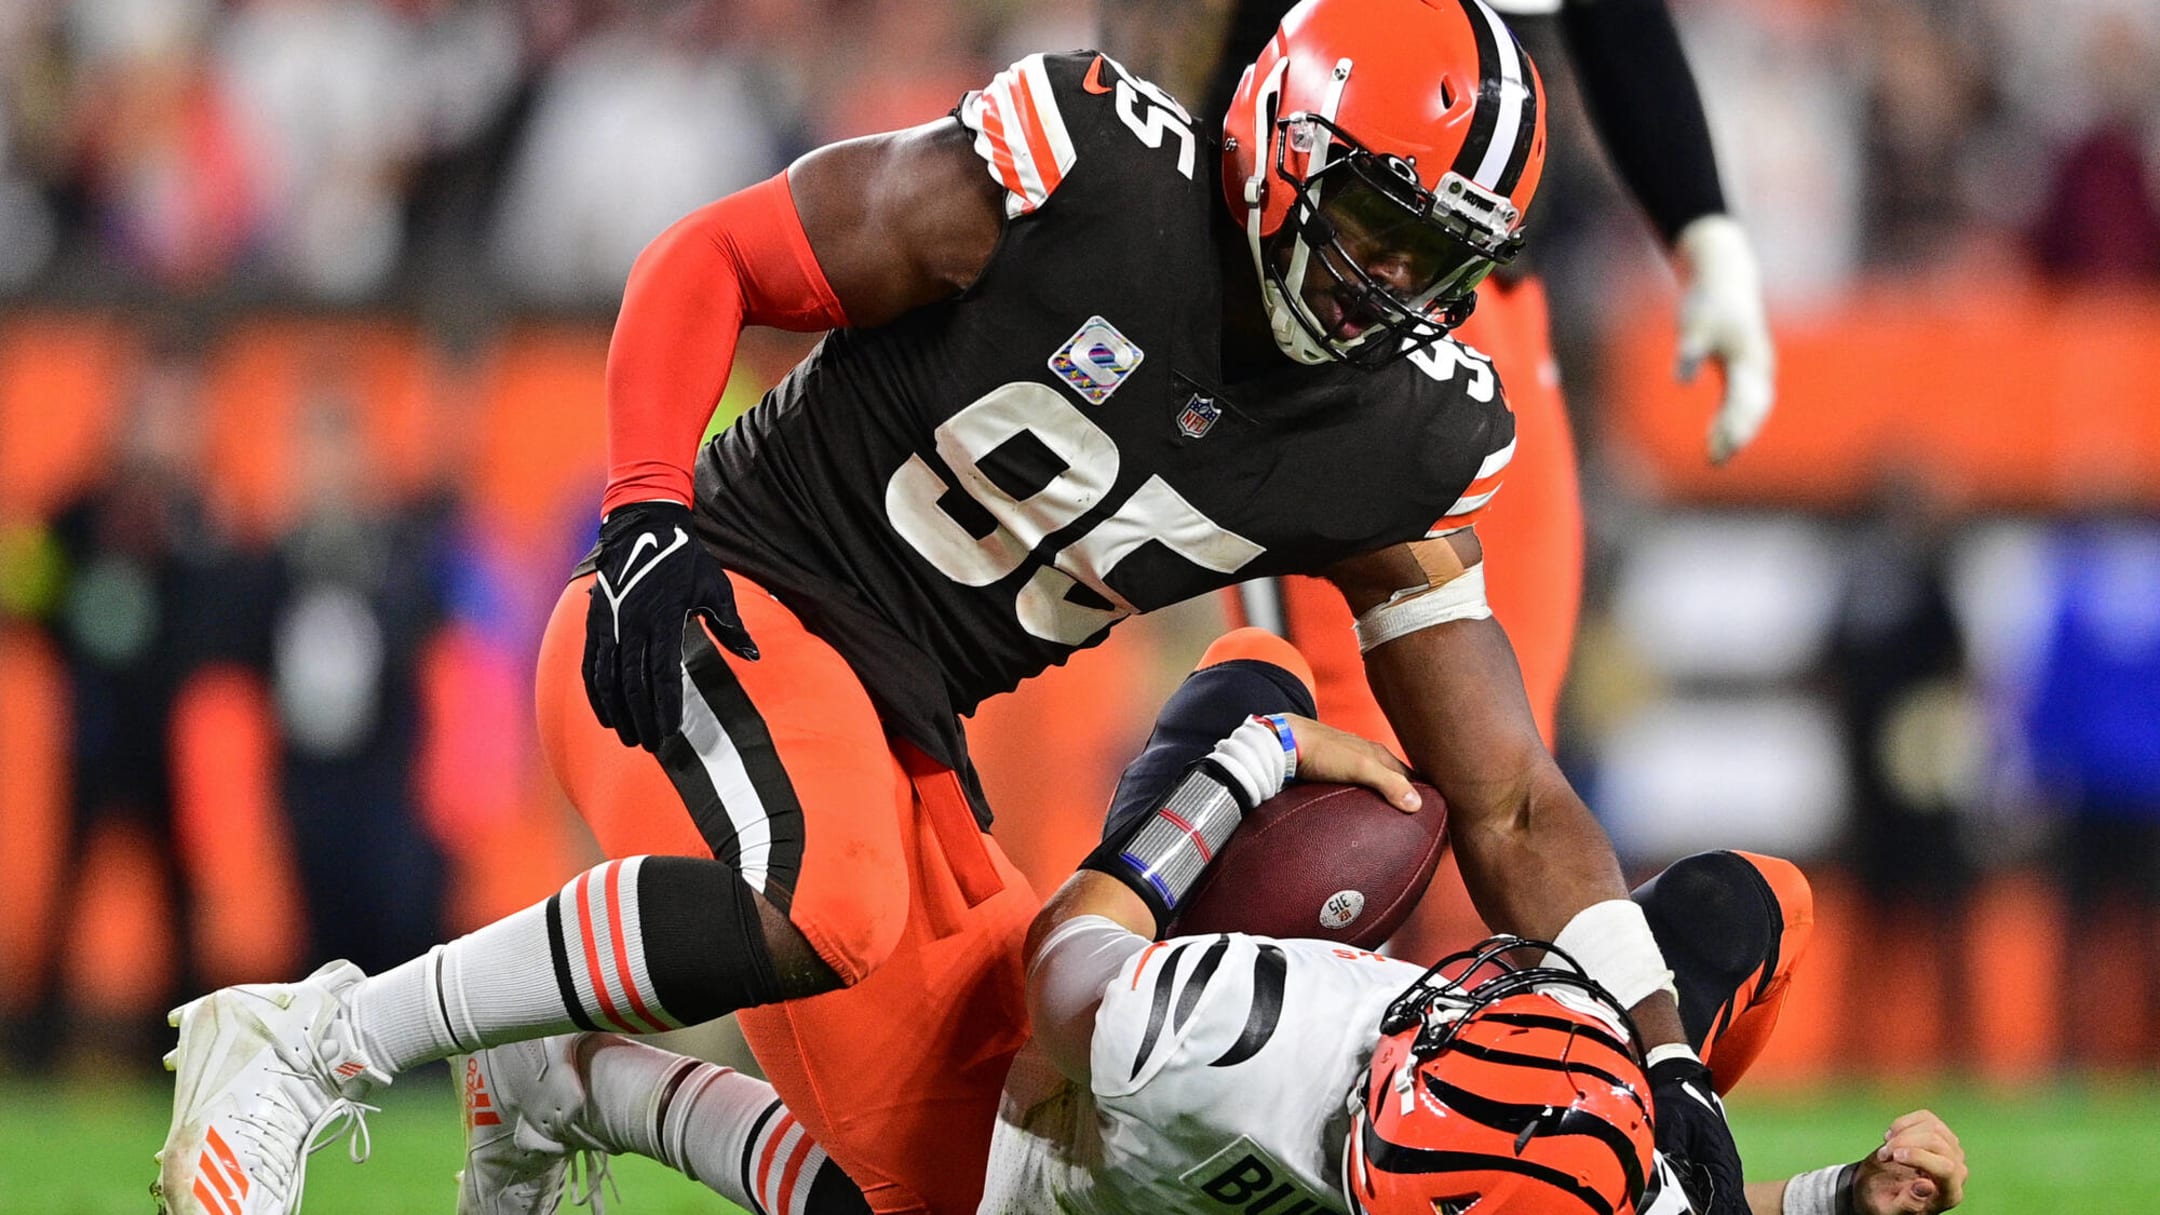 Myles Garrett and Joel Bitonio are highest rated players by Pro